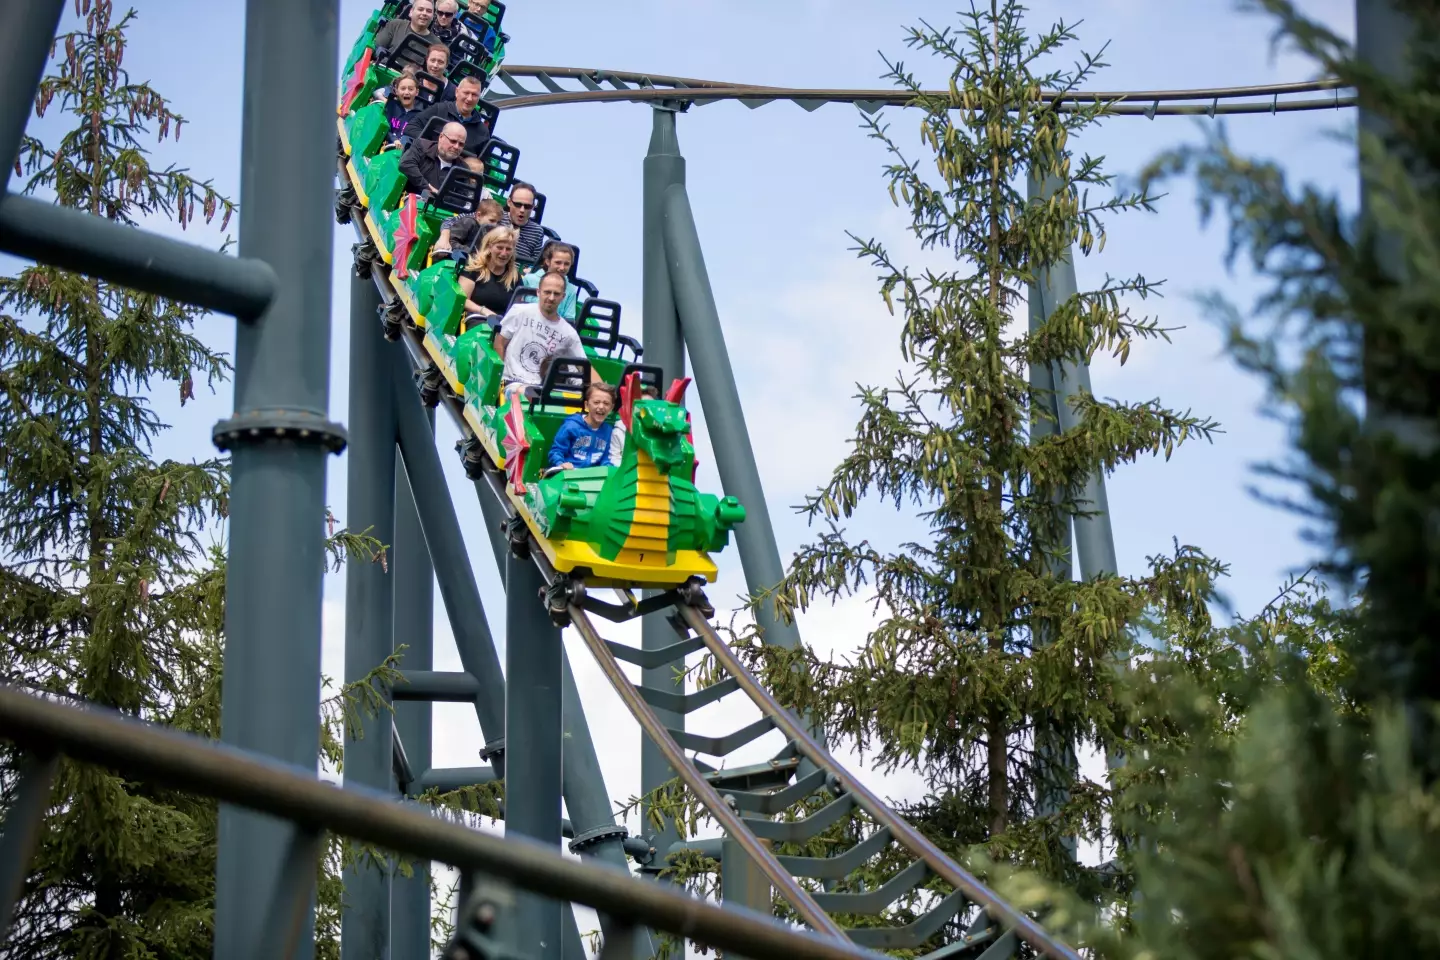 The Fire Dragon ride is one of the main attractions at Legoland Germany.